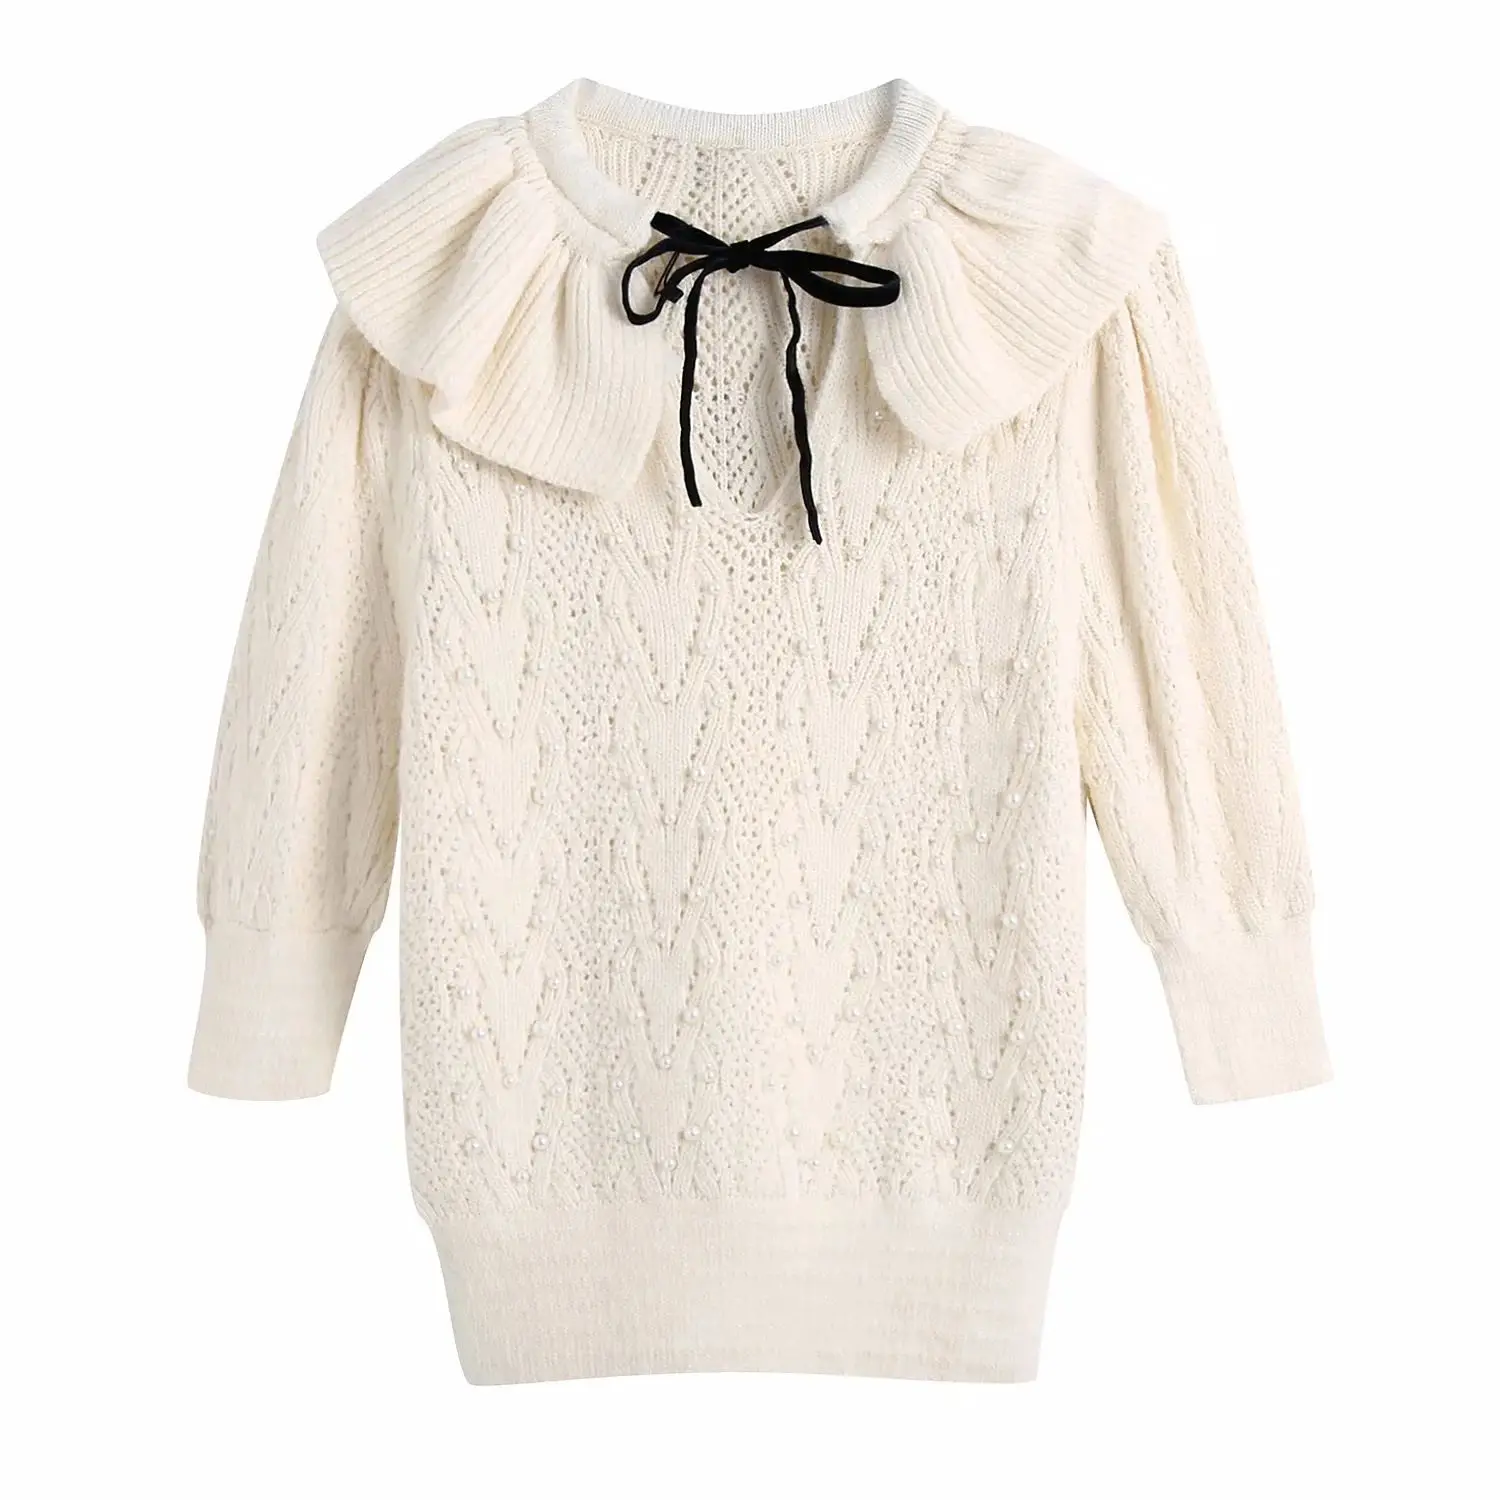 

New Pop Women Knit Sweater with Faux Pearls Ruffled Collared Half Sleeves Casual Vogue Elegant Chic Woman Knitted Sweaters